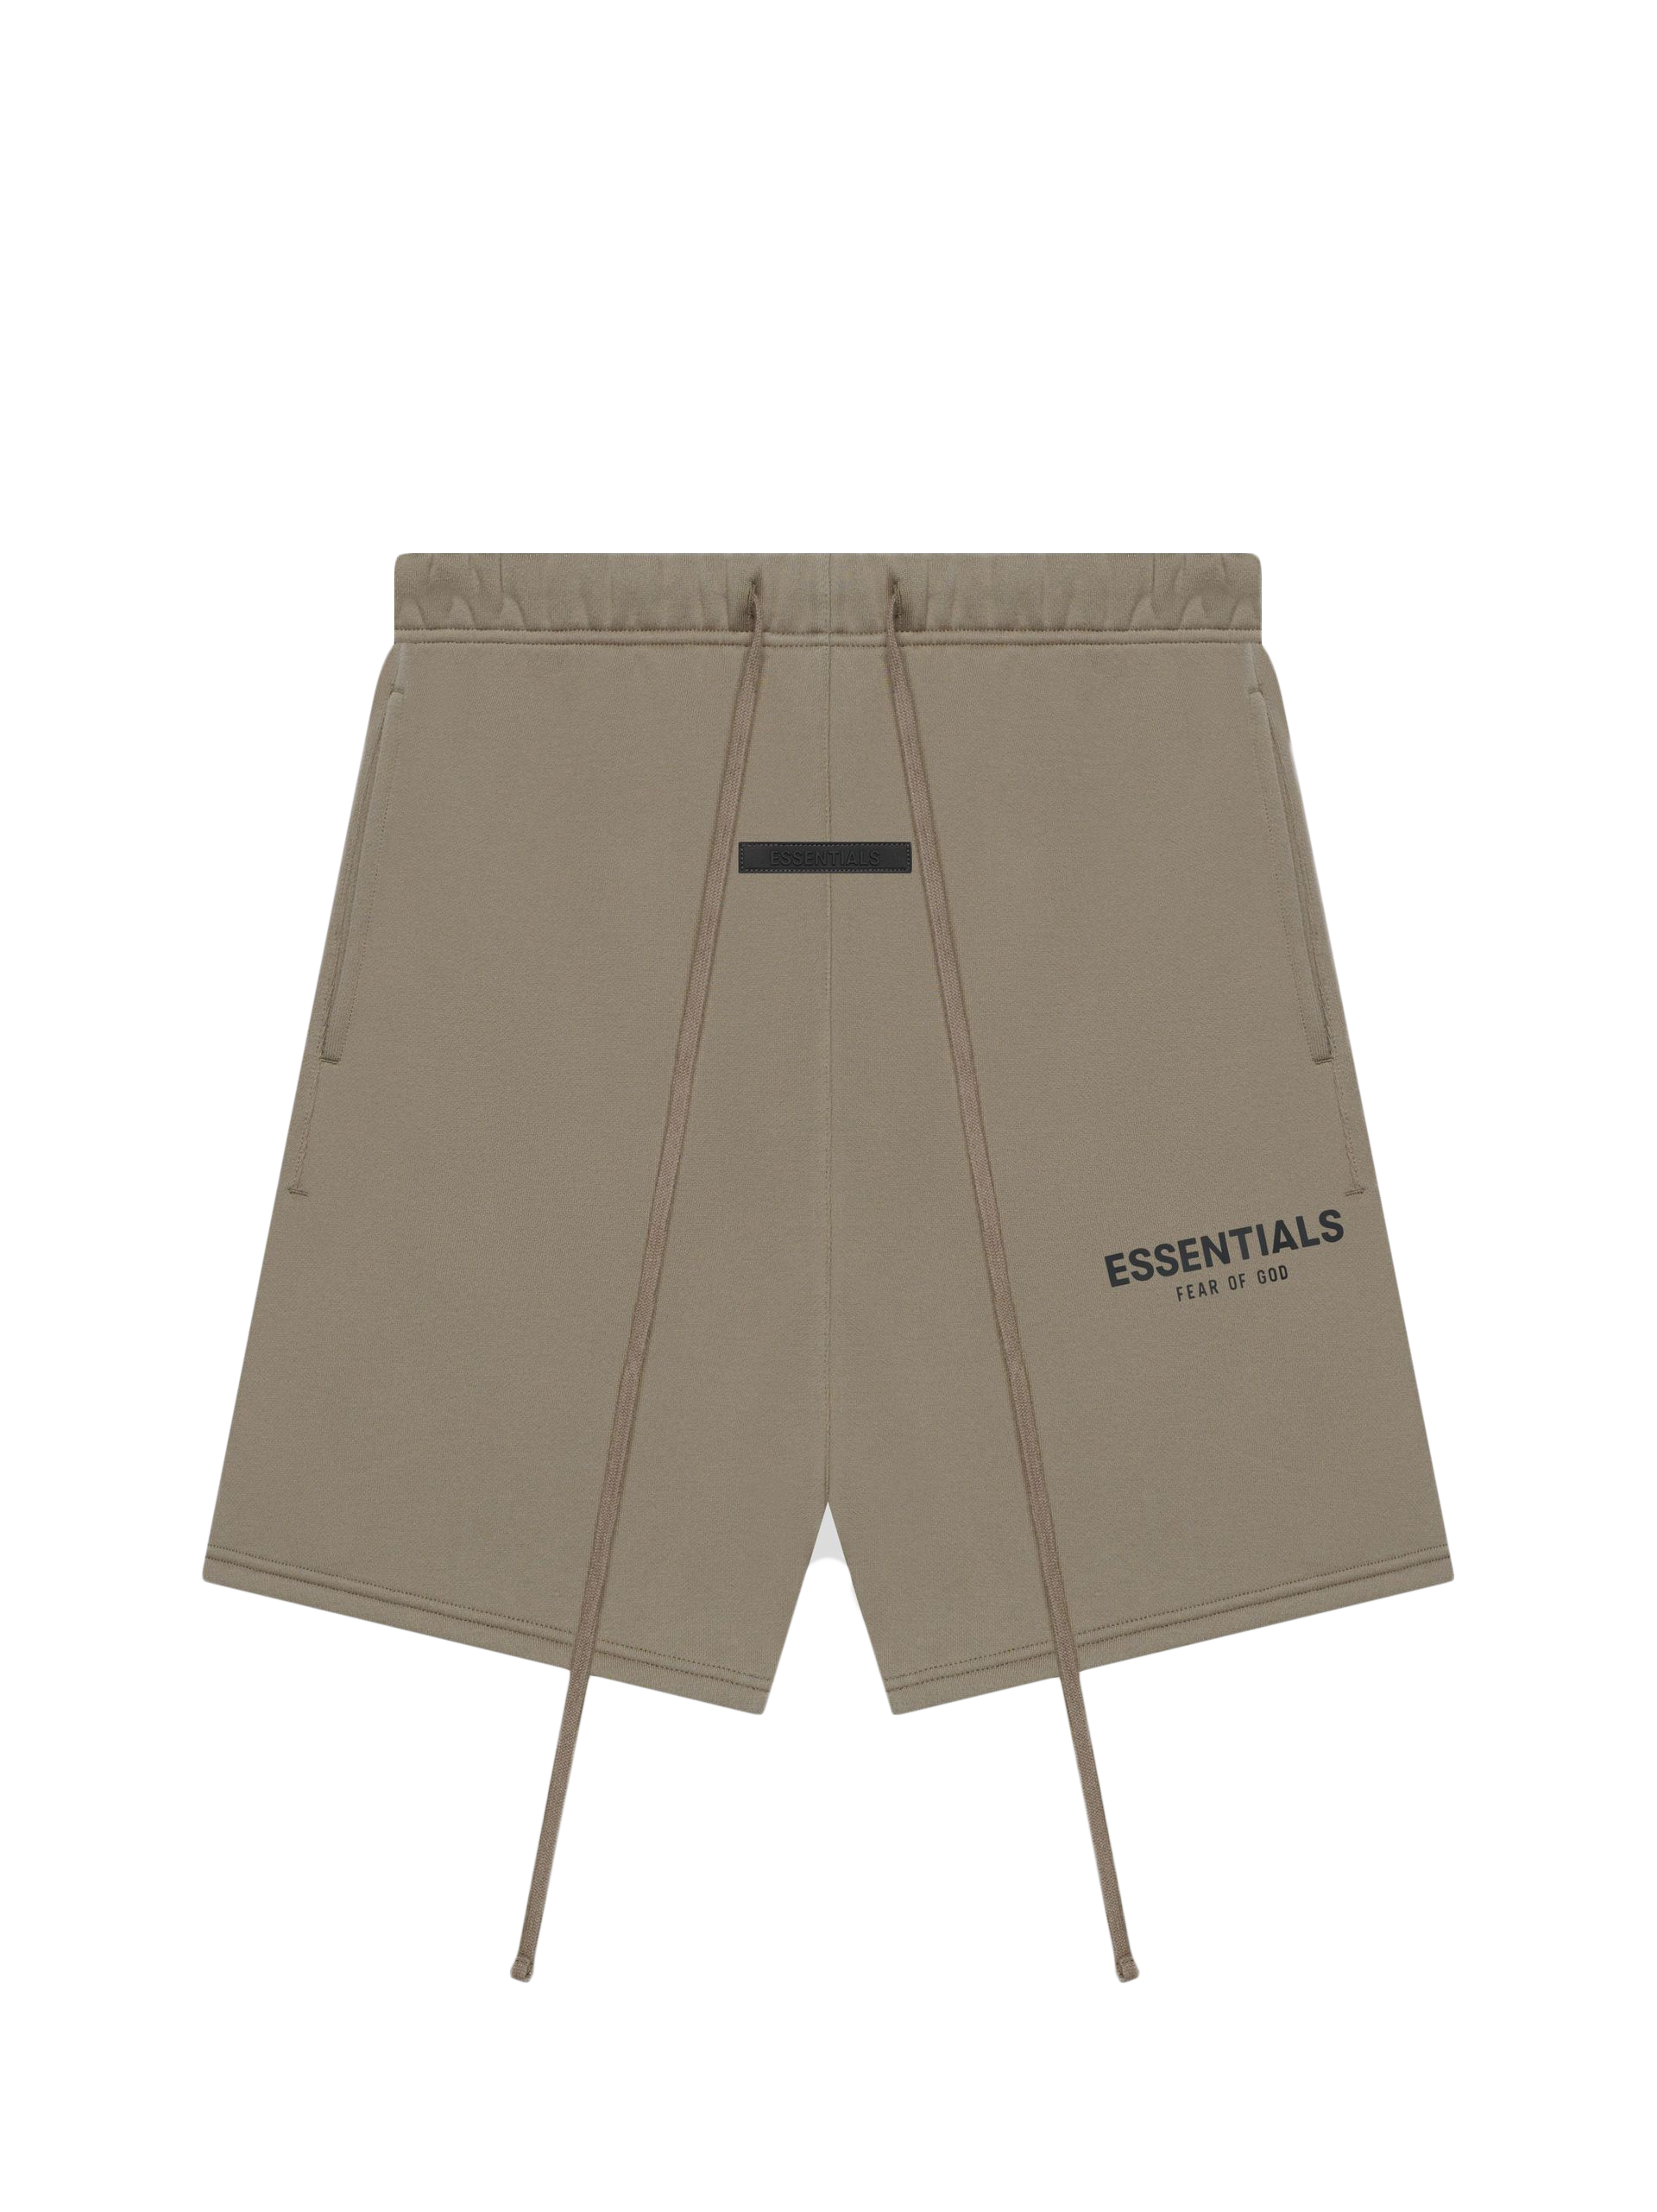 Fear of God Essentials Shorts (SS21) Taupe - SS21 - US